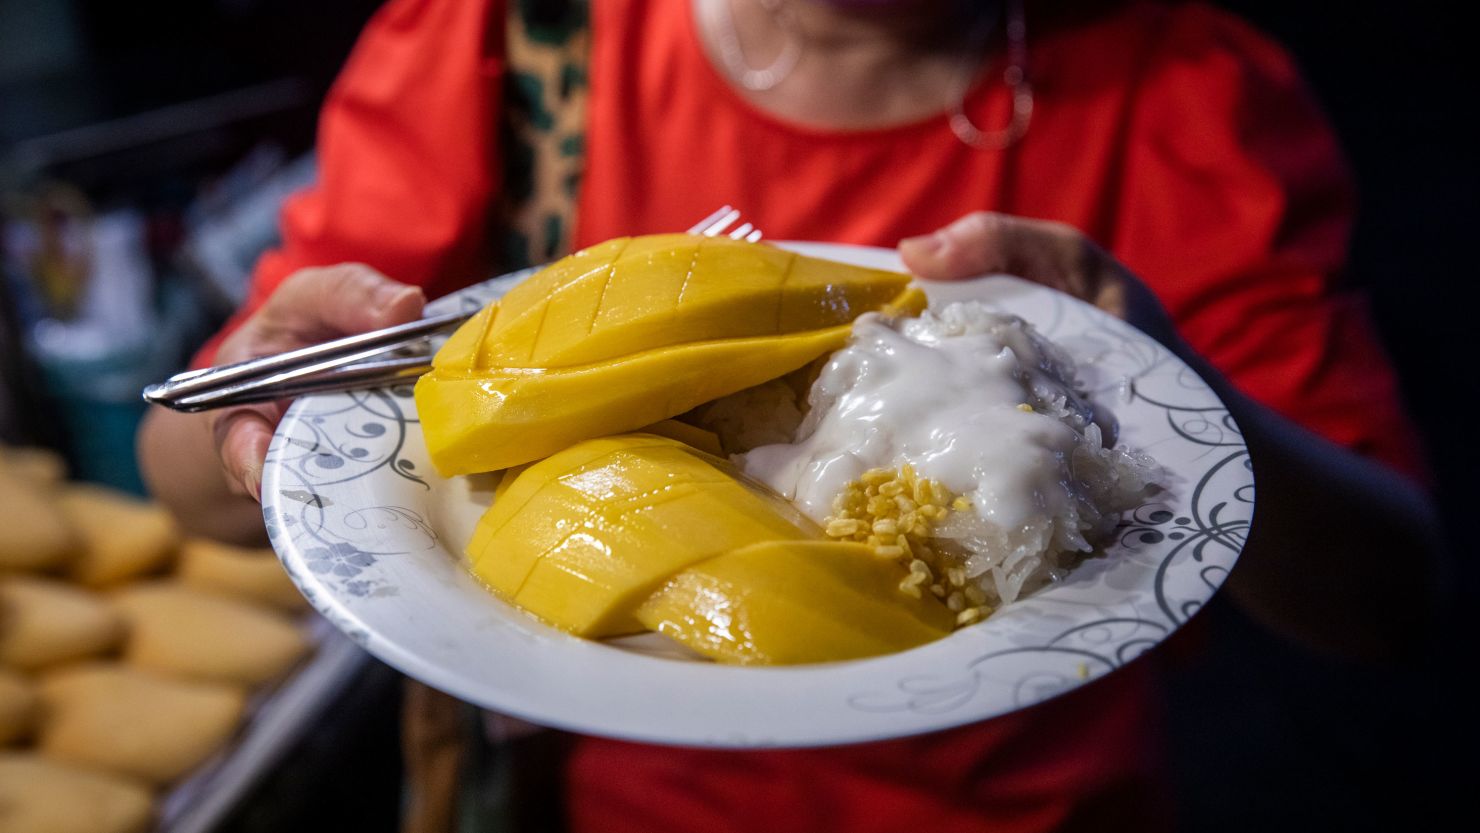 A customer holds a plate of mango sticky rice at a night market on April 21, 2022 in Bangkok, Thailand. Photo by Lauren DeCicca/Getty Images